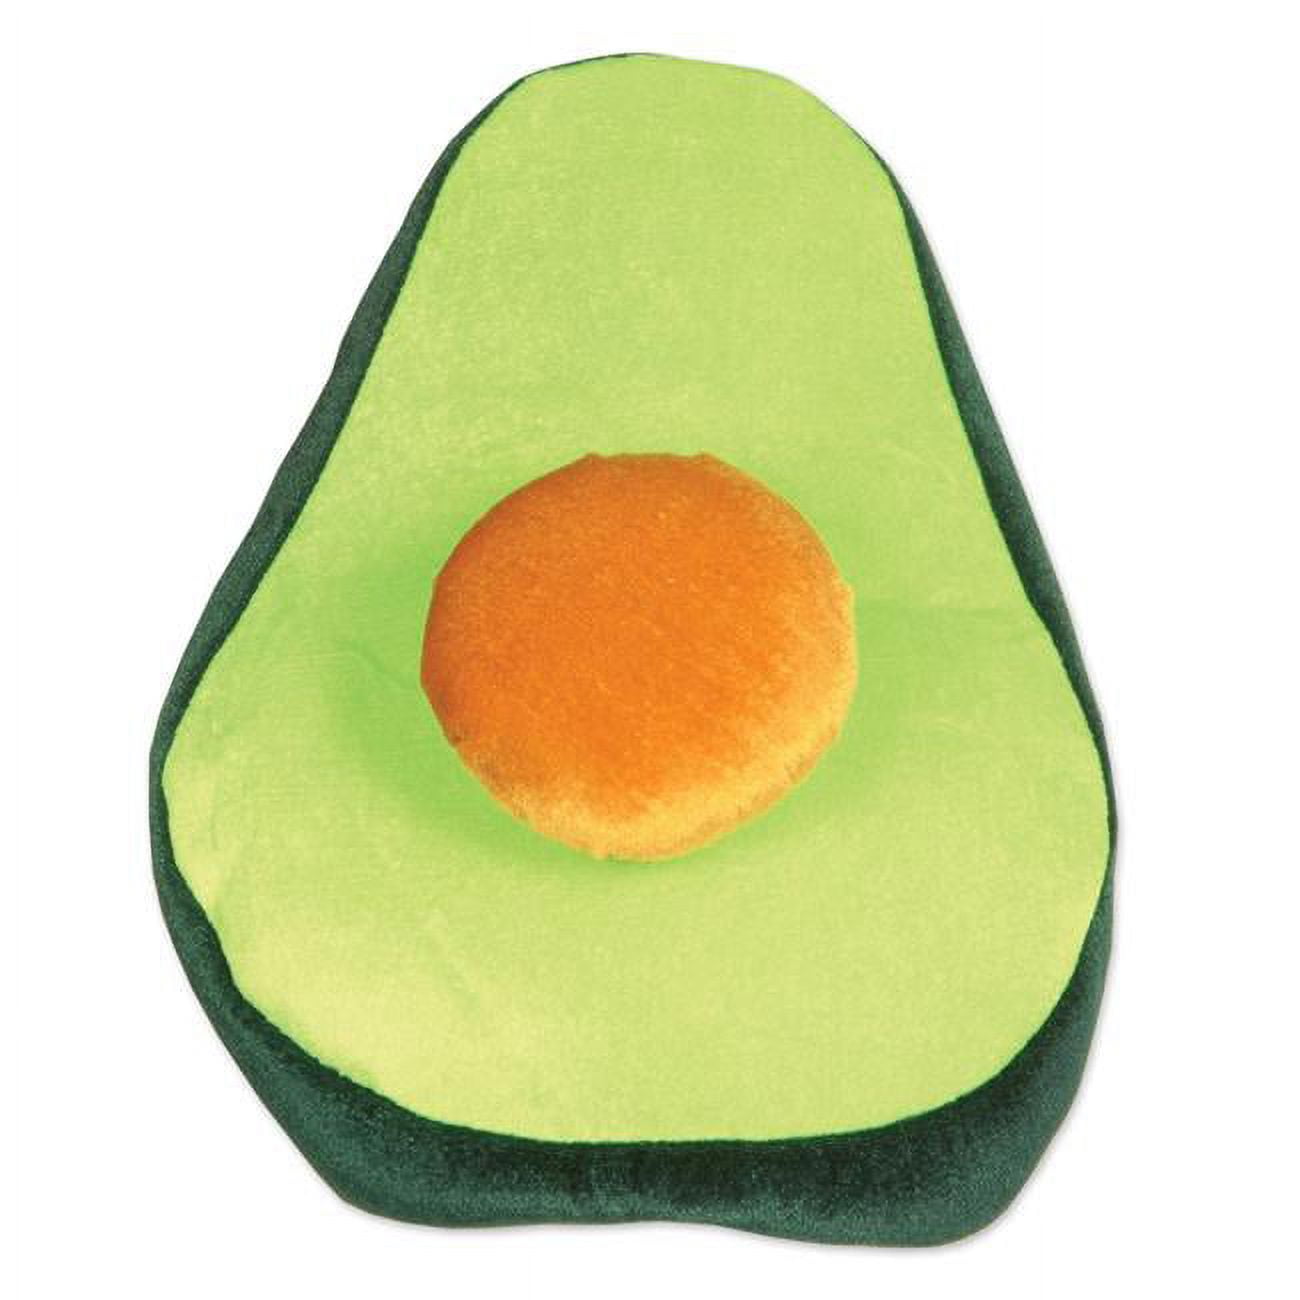 Picture of Beistle 60825 Plush Avocado Hat - Pack of 6 - One Size Fits All